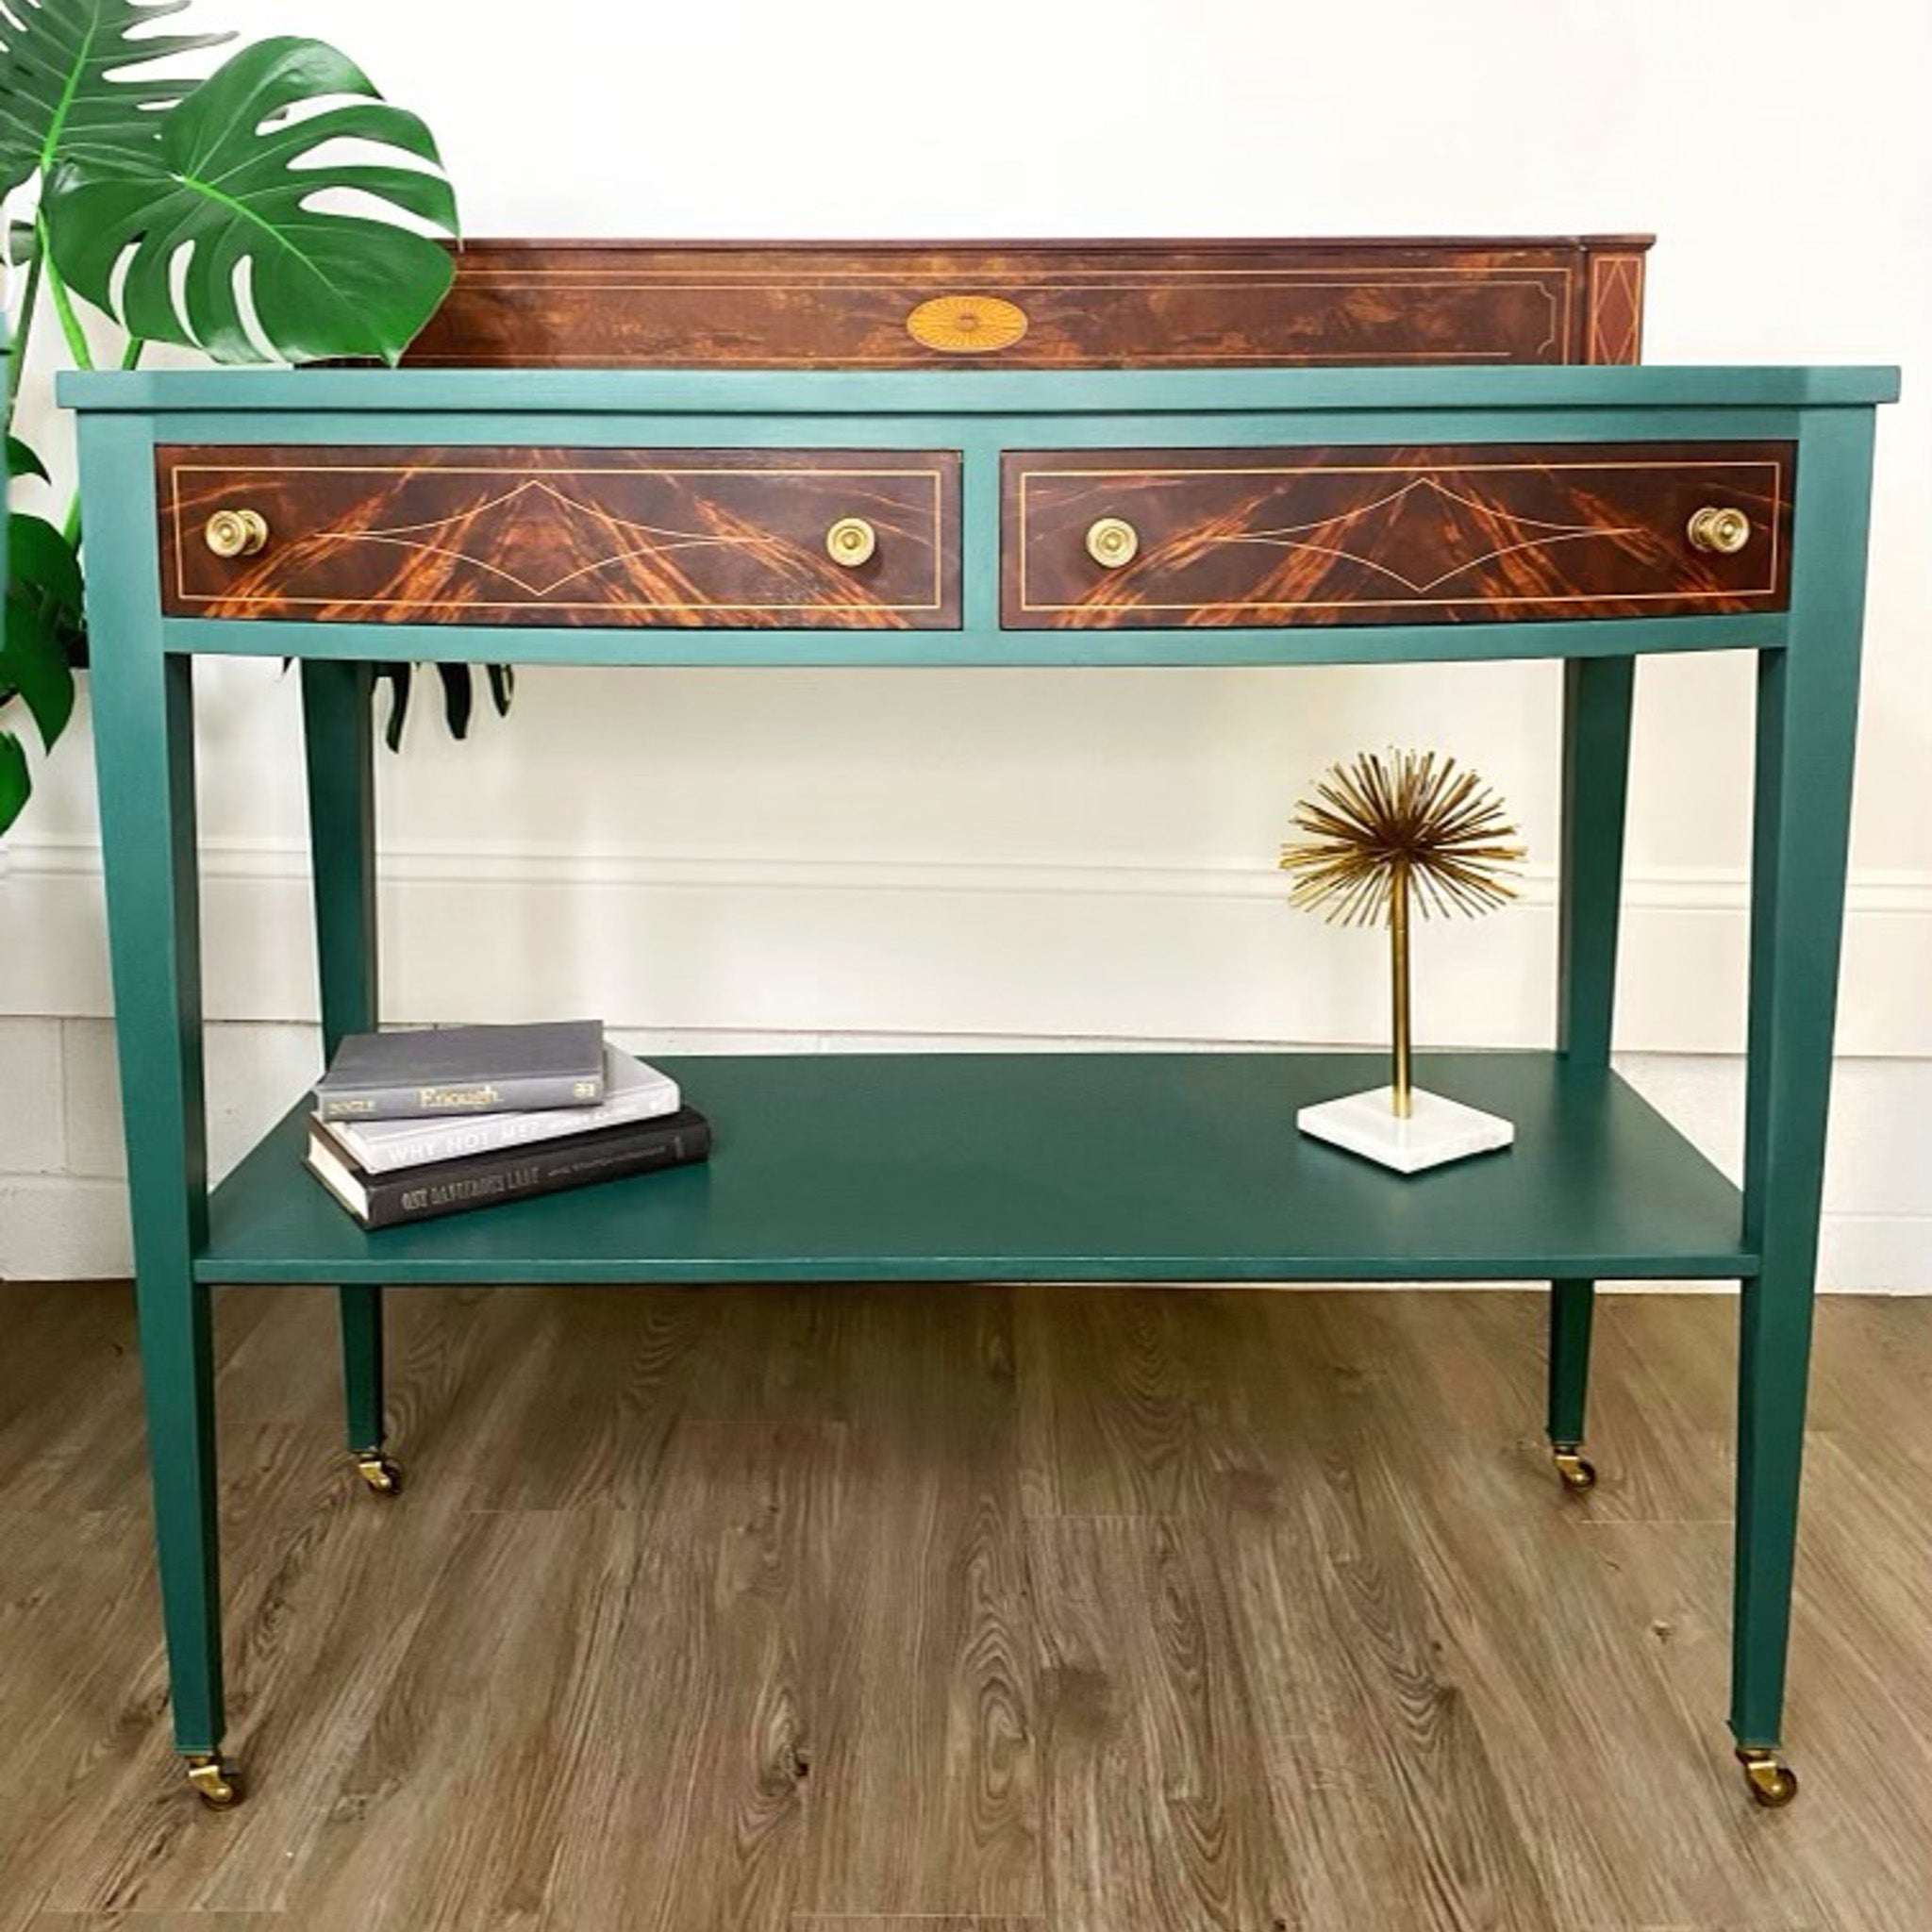 A vintage desk is painted in Dixie Belle's Palmetto chalk mineral paint and has natural wood accents.